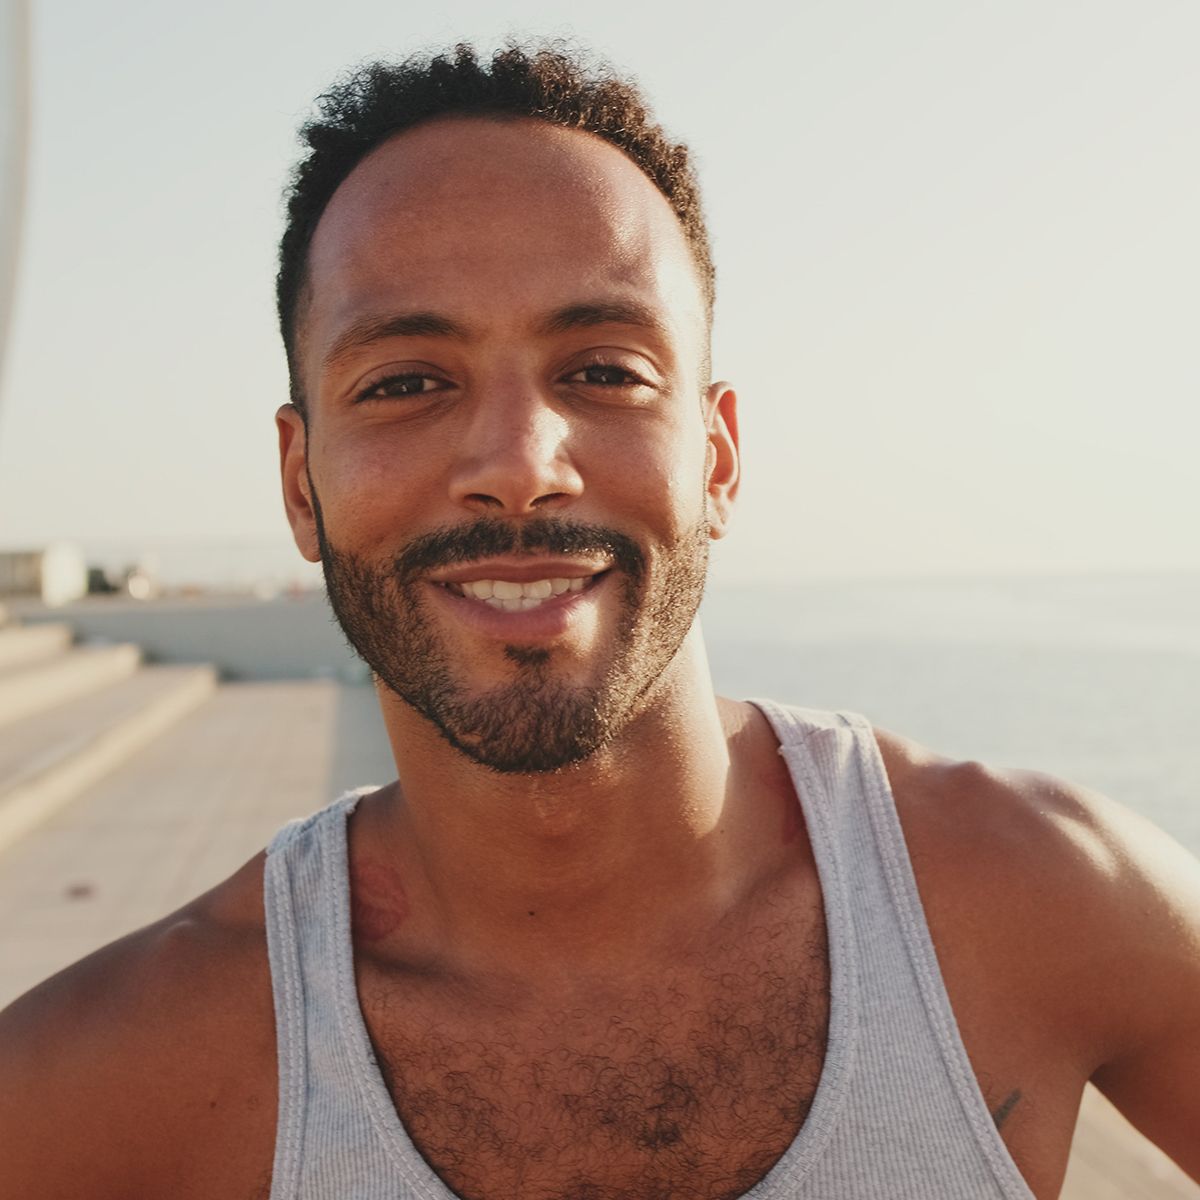 A man with a beard is wearing a tank top and smiling